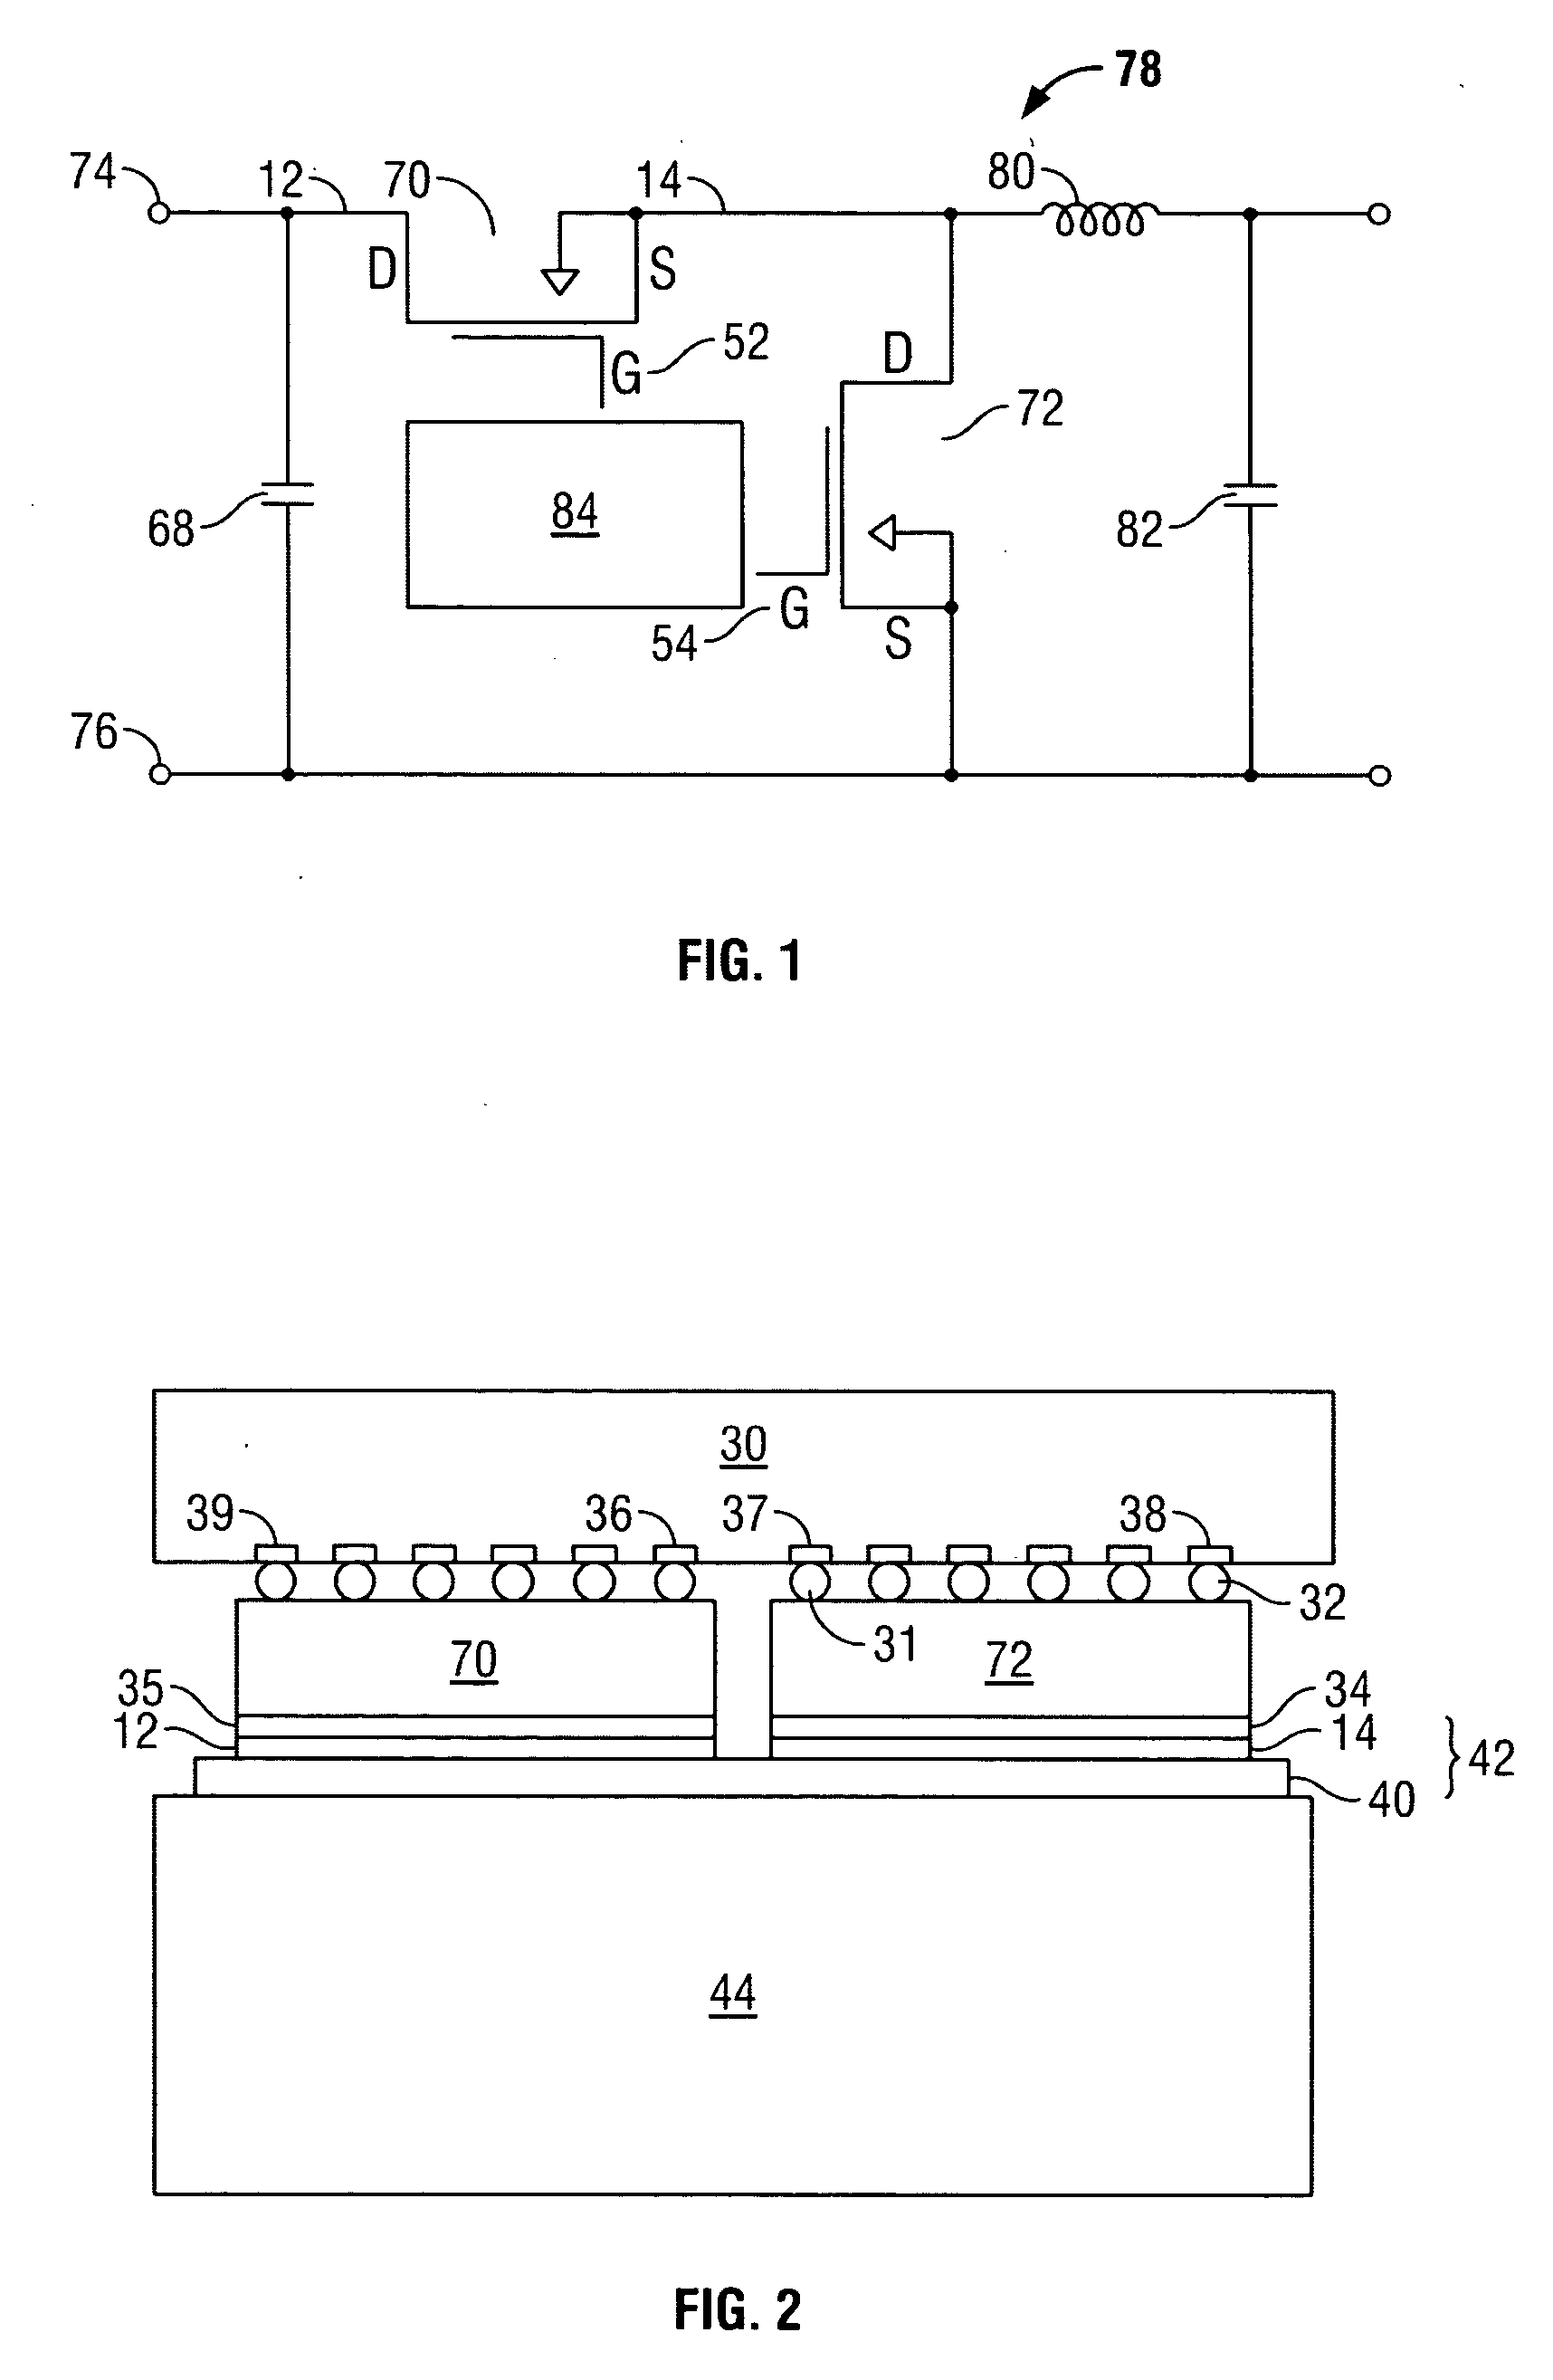 Power supply packaging system